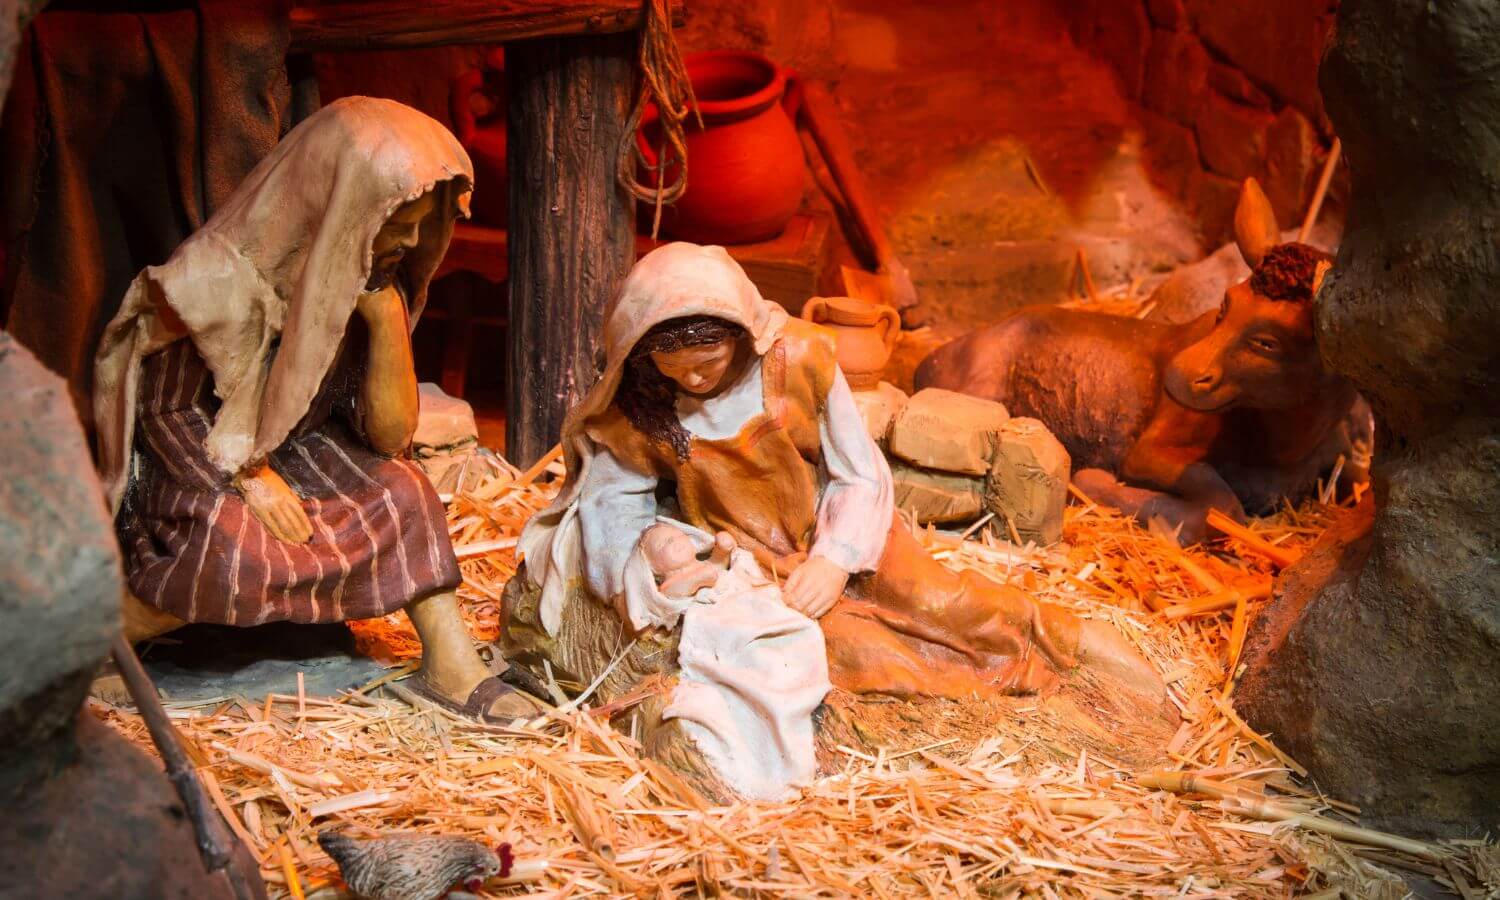 Traditional Nacimiento in Mexico, Joseph, and Mary with the baby Jesus in a stable with a donkey.